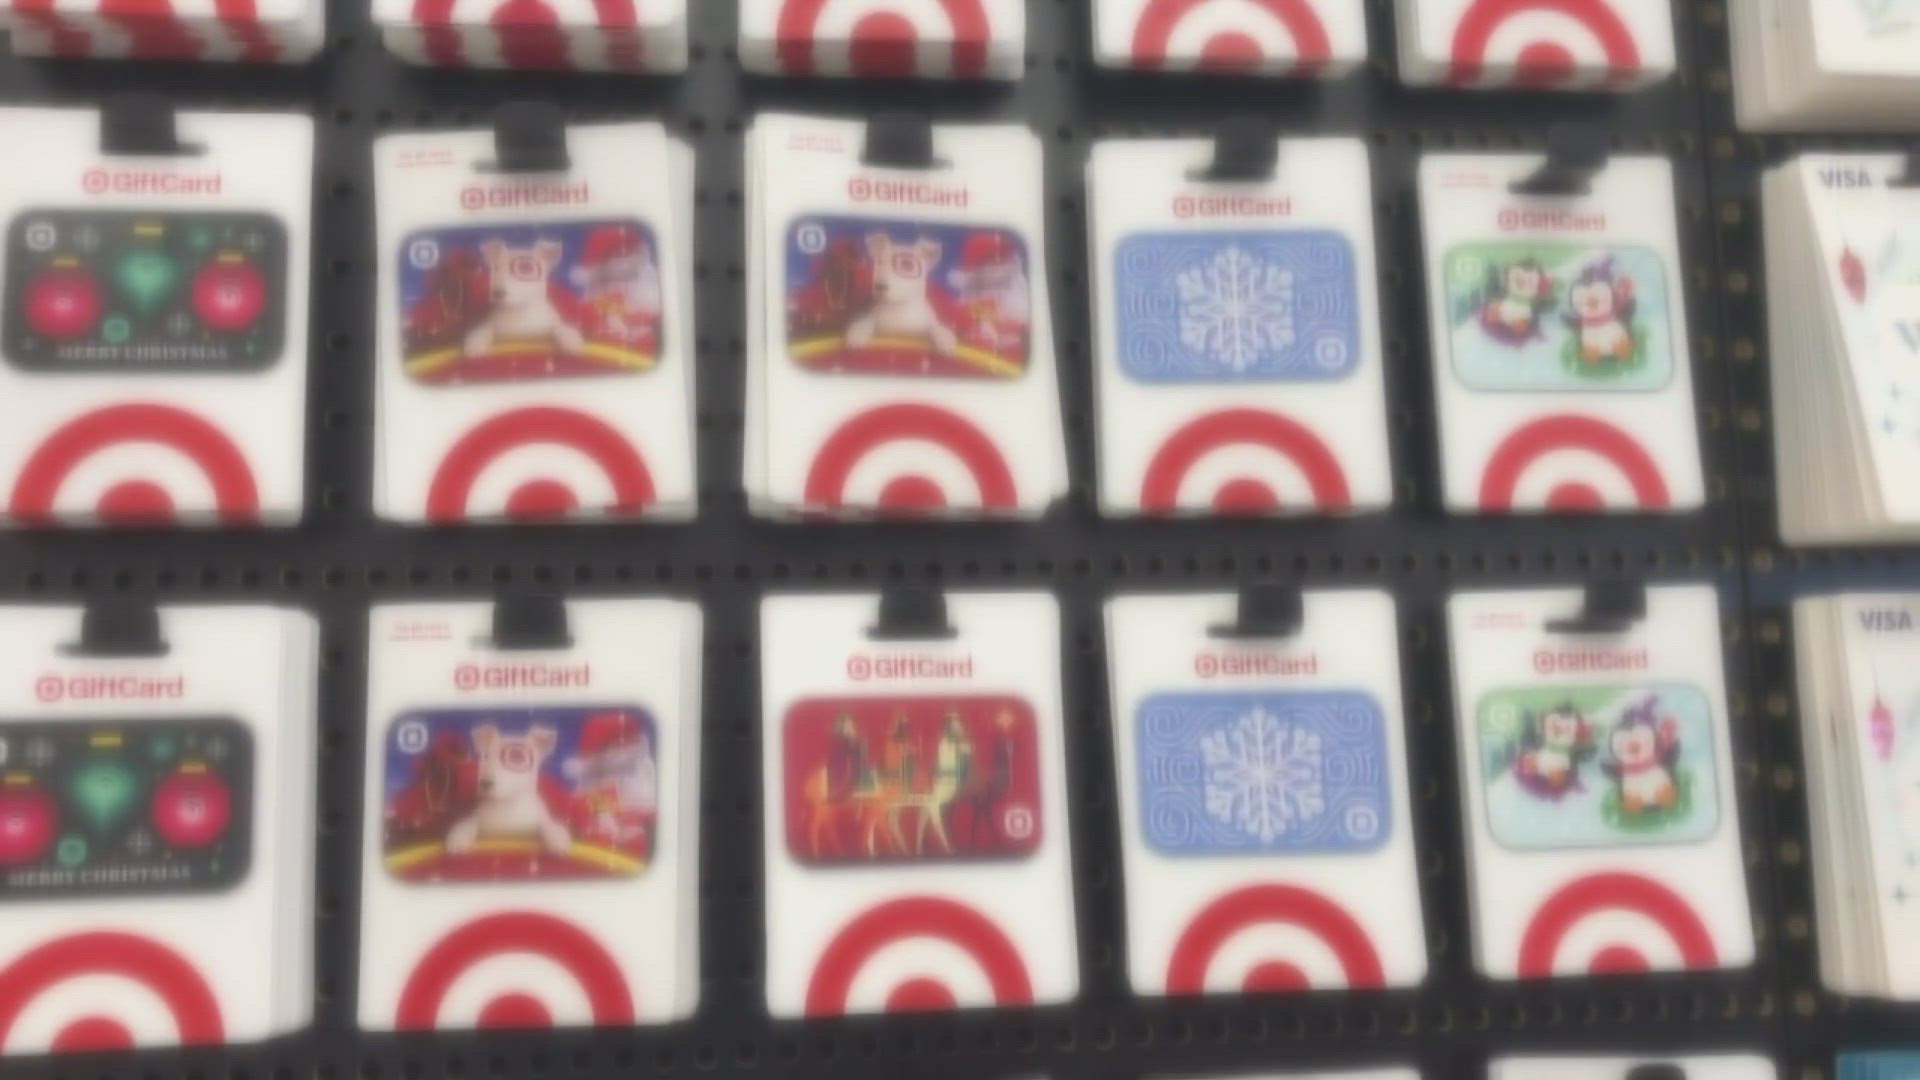 Free $500 Target Gift Card Generator: A Warning for Online Shoppers